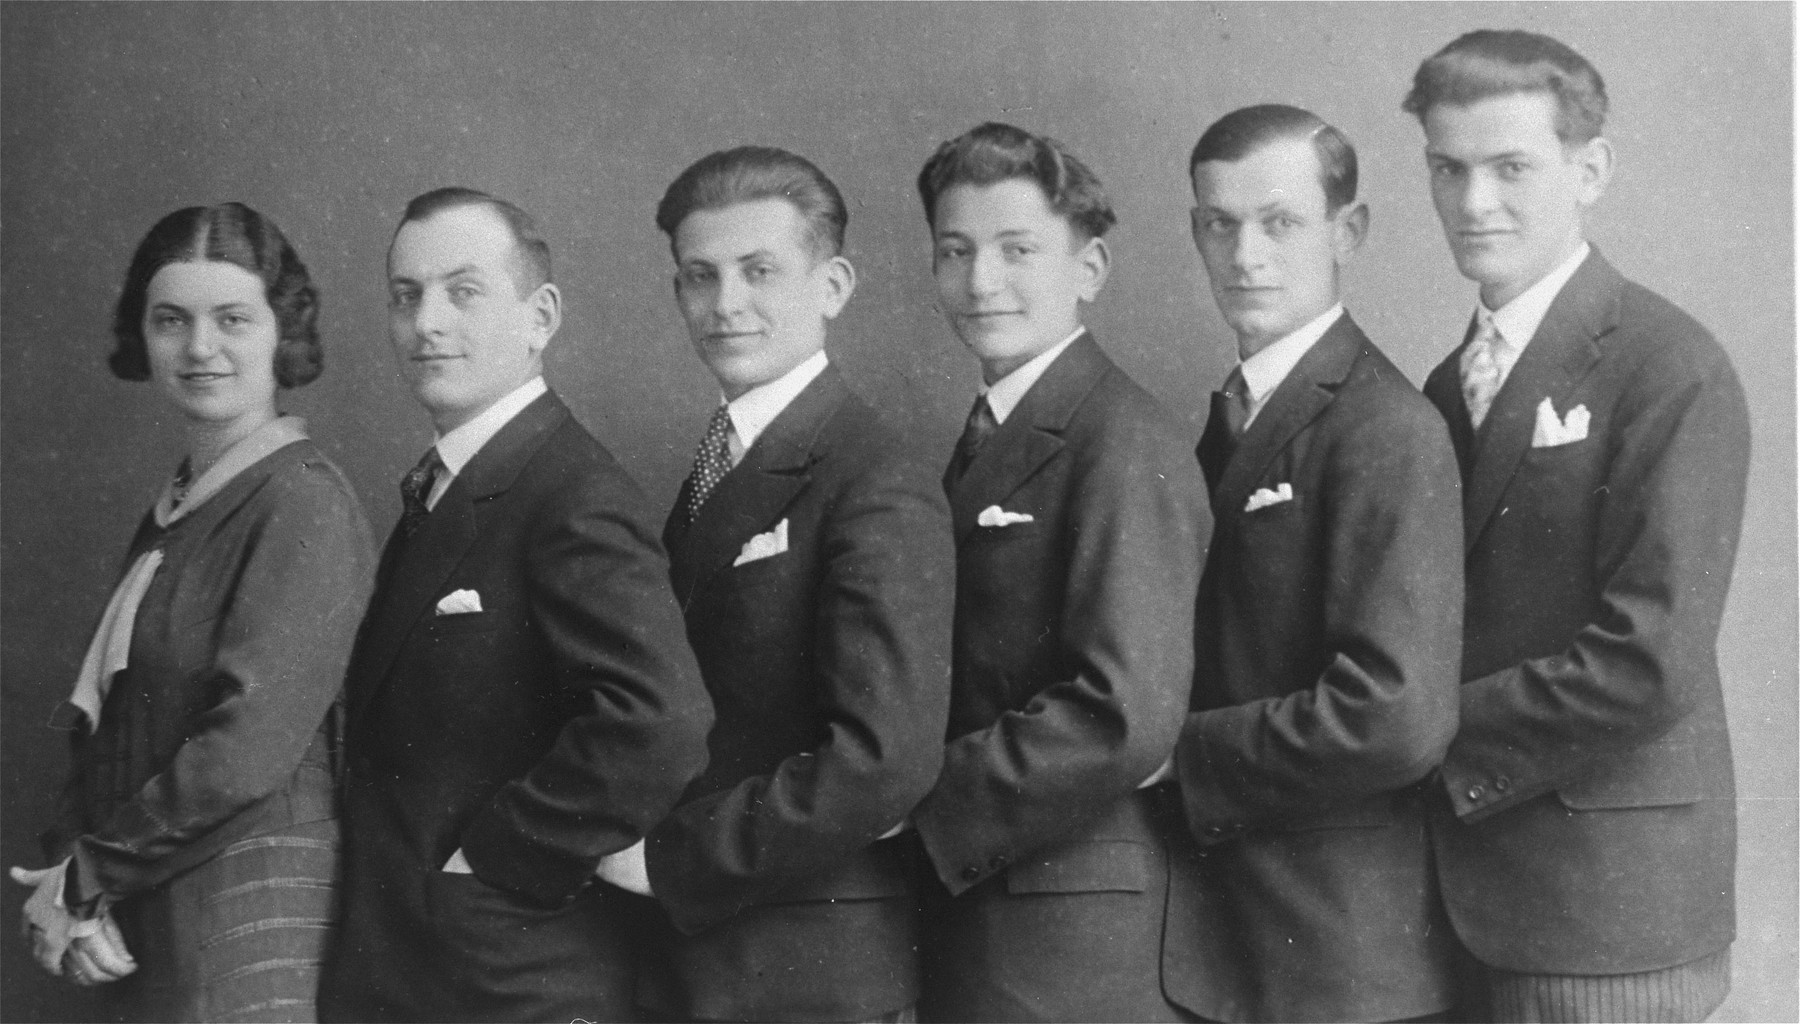 Group portrait of six Jewish siblings in Pozega, Croatia.

Pictured are the children of Julius and Rosa (Gruenwald) Klein.  From left to right are: Blanka (Klein) Kupfermann, Zlatan, Zdenko, Bruno, Milan, and Dragan Klein.  All of the men perished during the Holocaust.